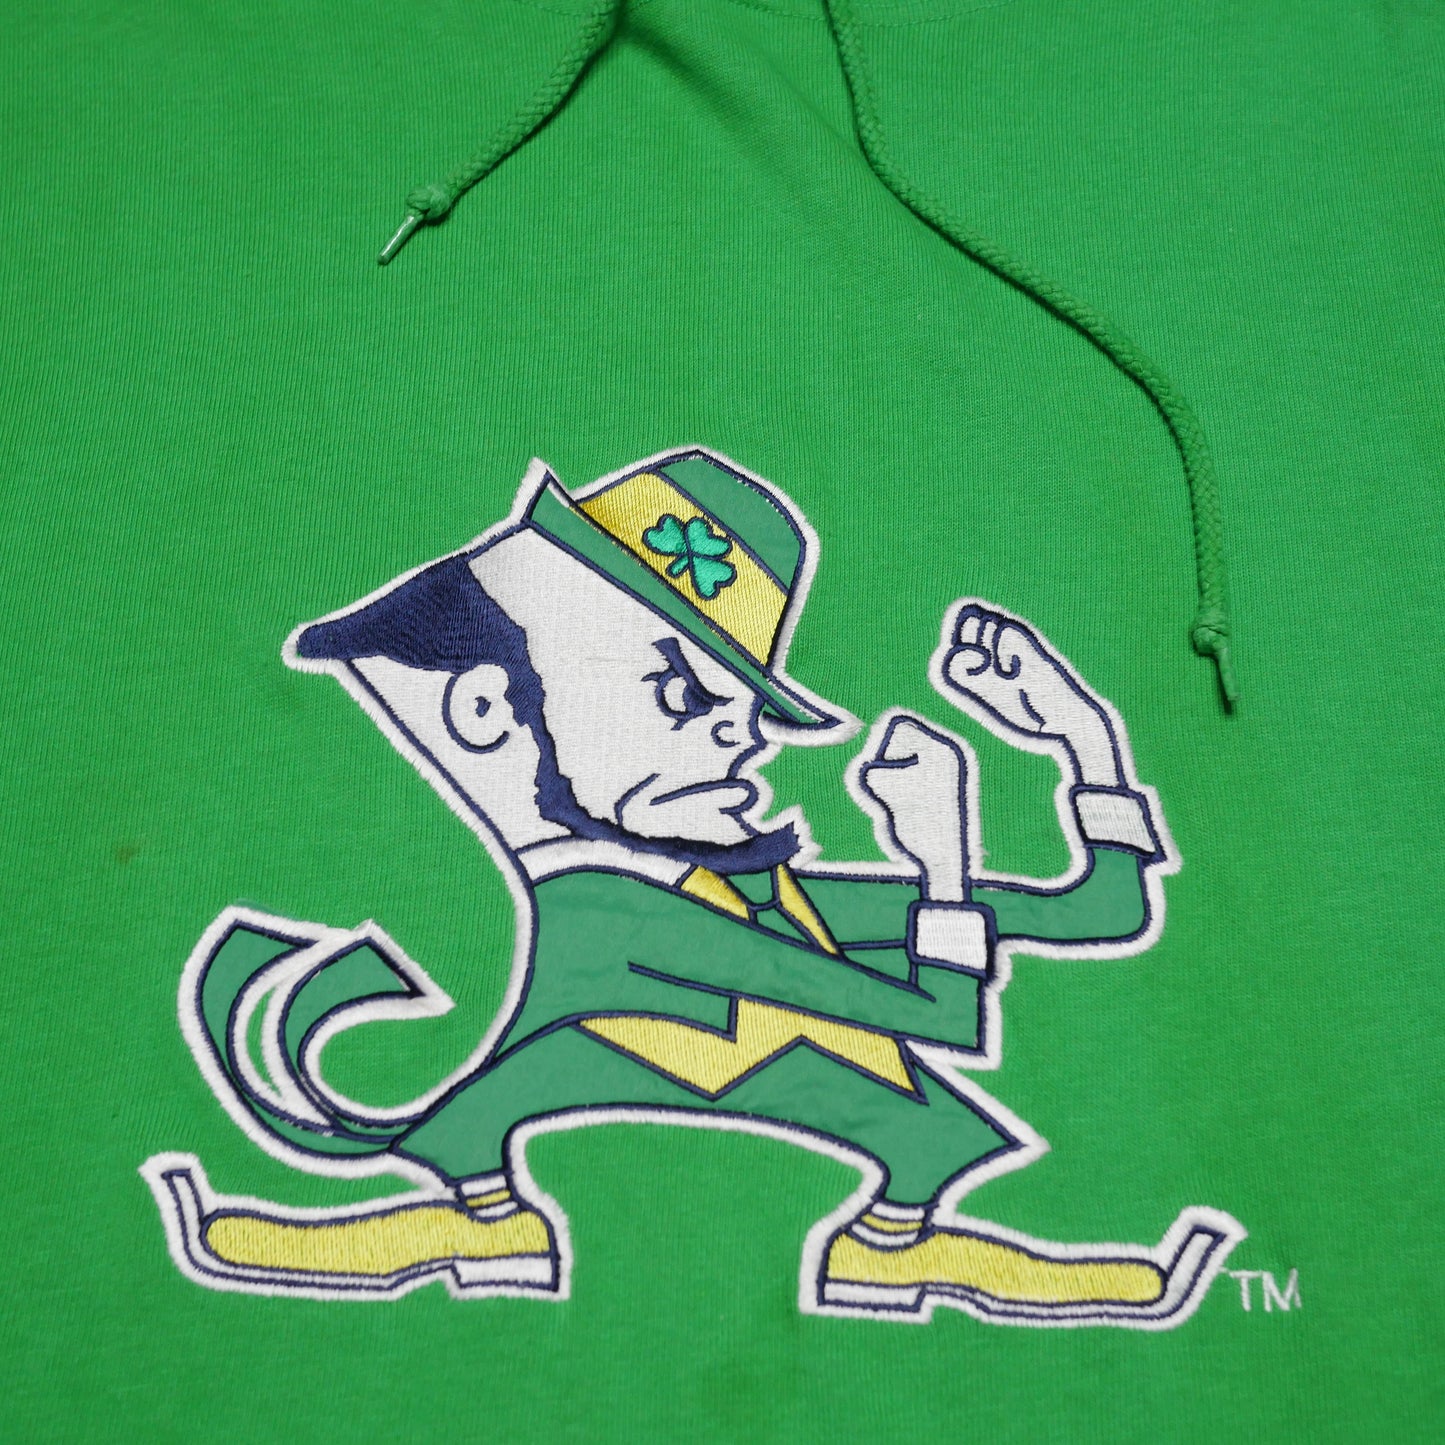 In the Paint Notre Dame Hooded Longsleeve - XL